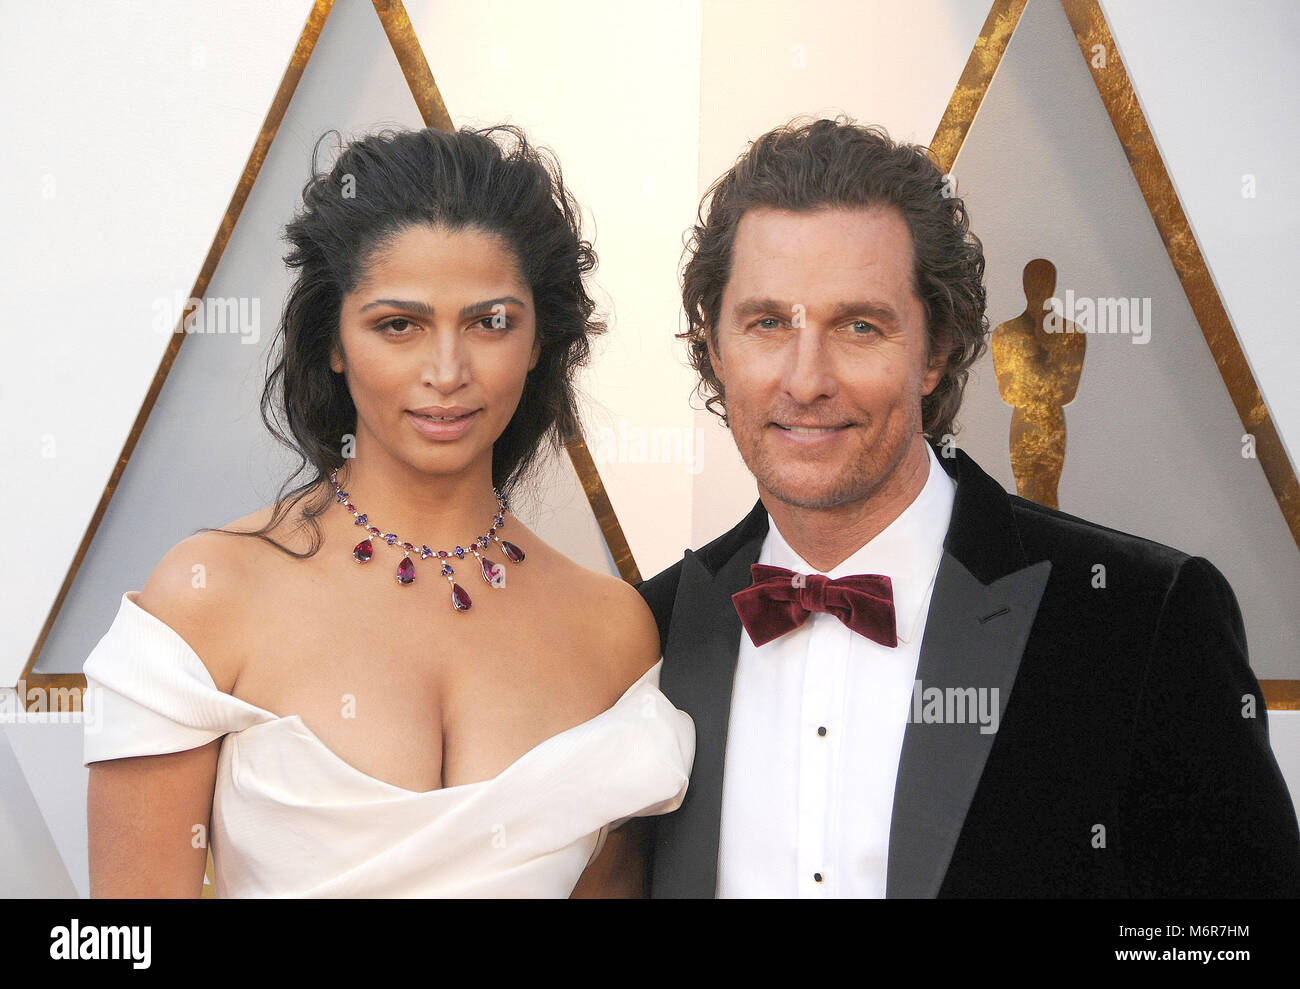 Los Angeles, California, USA. 4th Mar, 2018. March 4th 2018 - Los Angeles, California USA - Actor MATTHEW MCCONAUGHEY, Actress CAMILA ALVES at the 90th Academy Awards held at the Hollywood & Highland Center, Hollywood, Los Angeles. Credit: Paul Fenton/ZUMA Wire/Alamy Live News Stock Photo